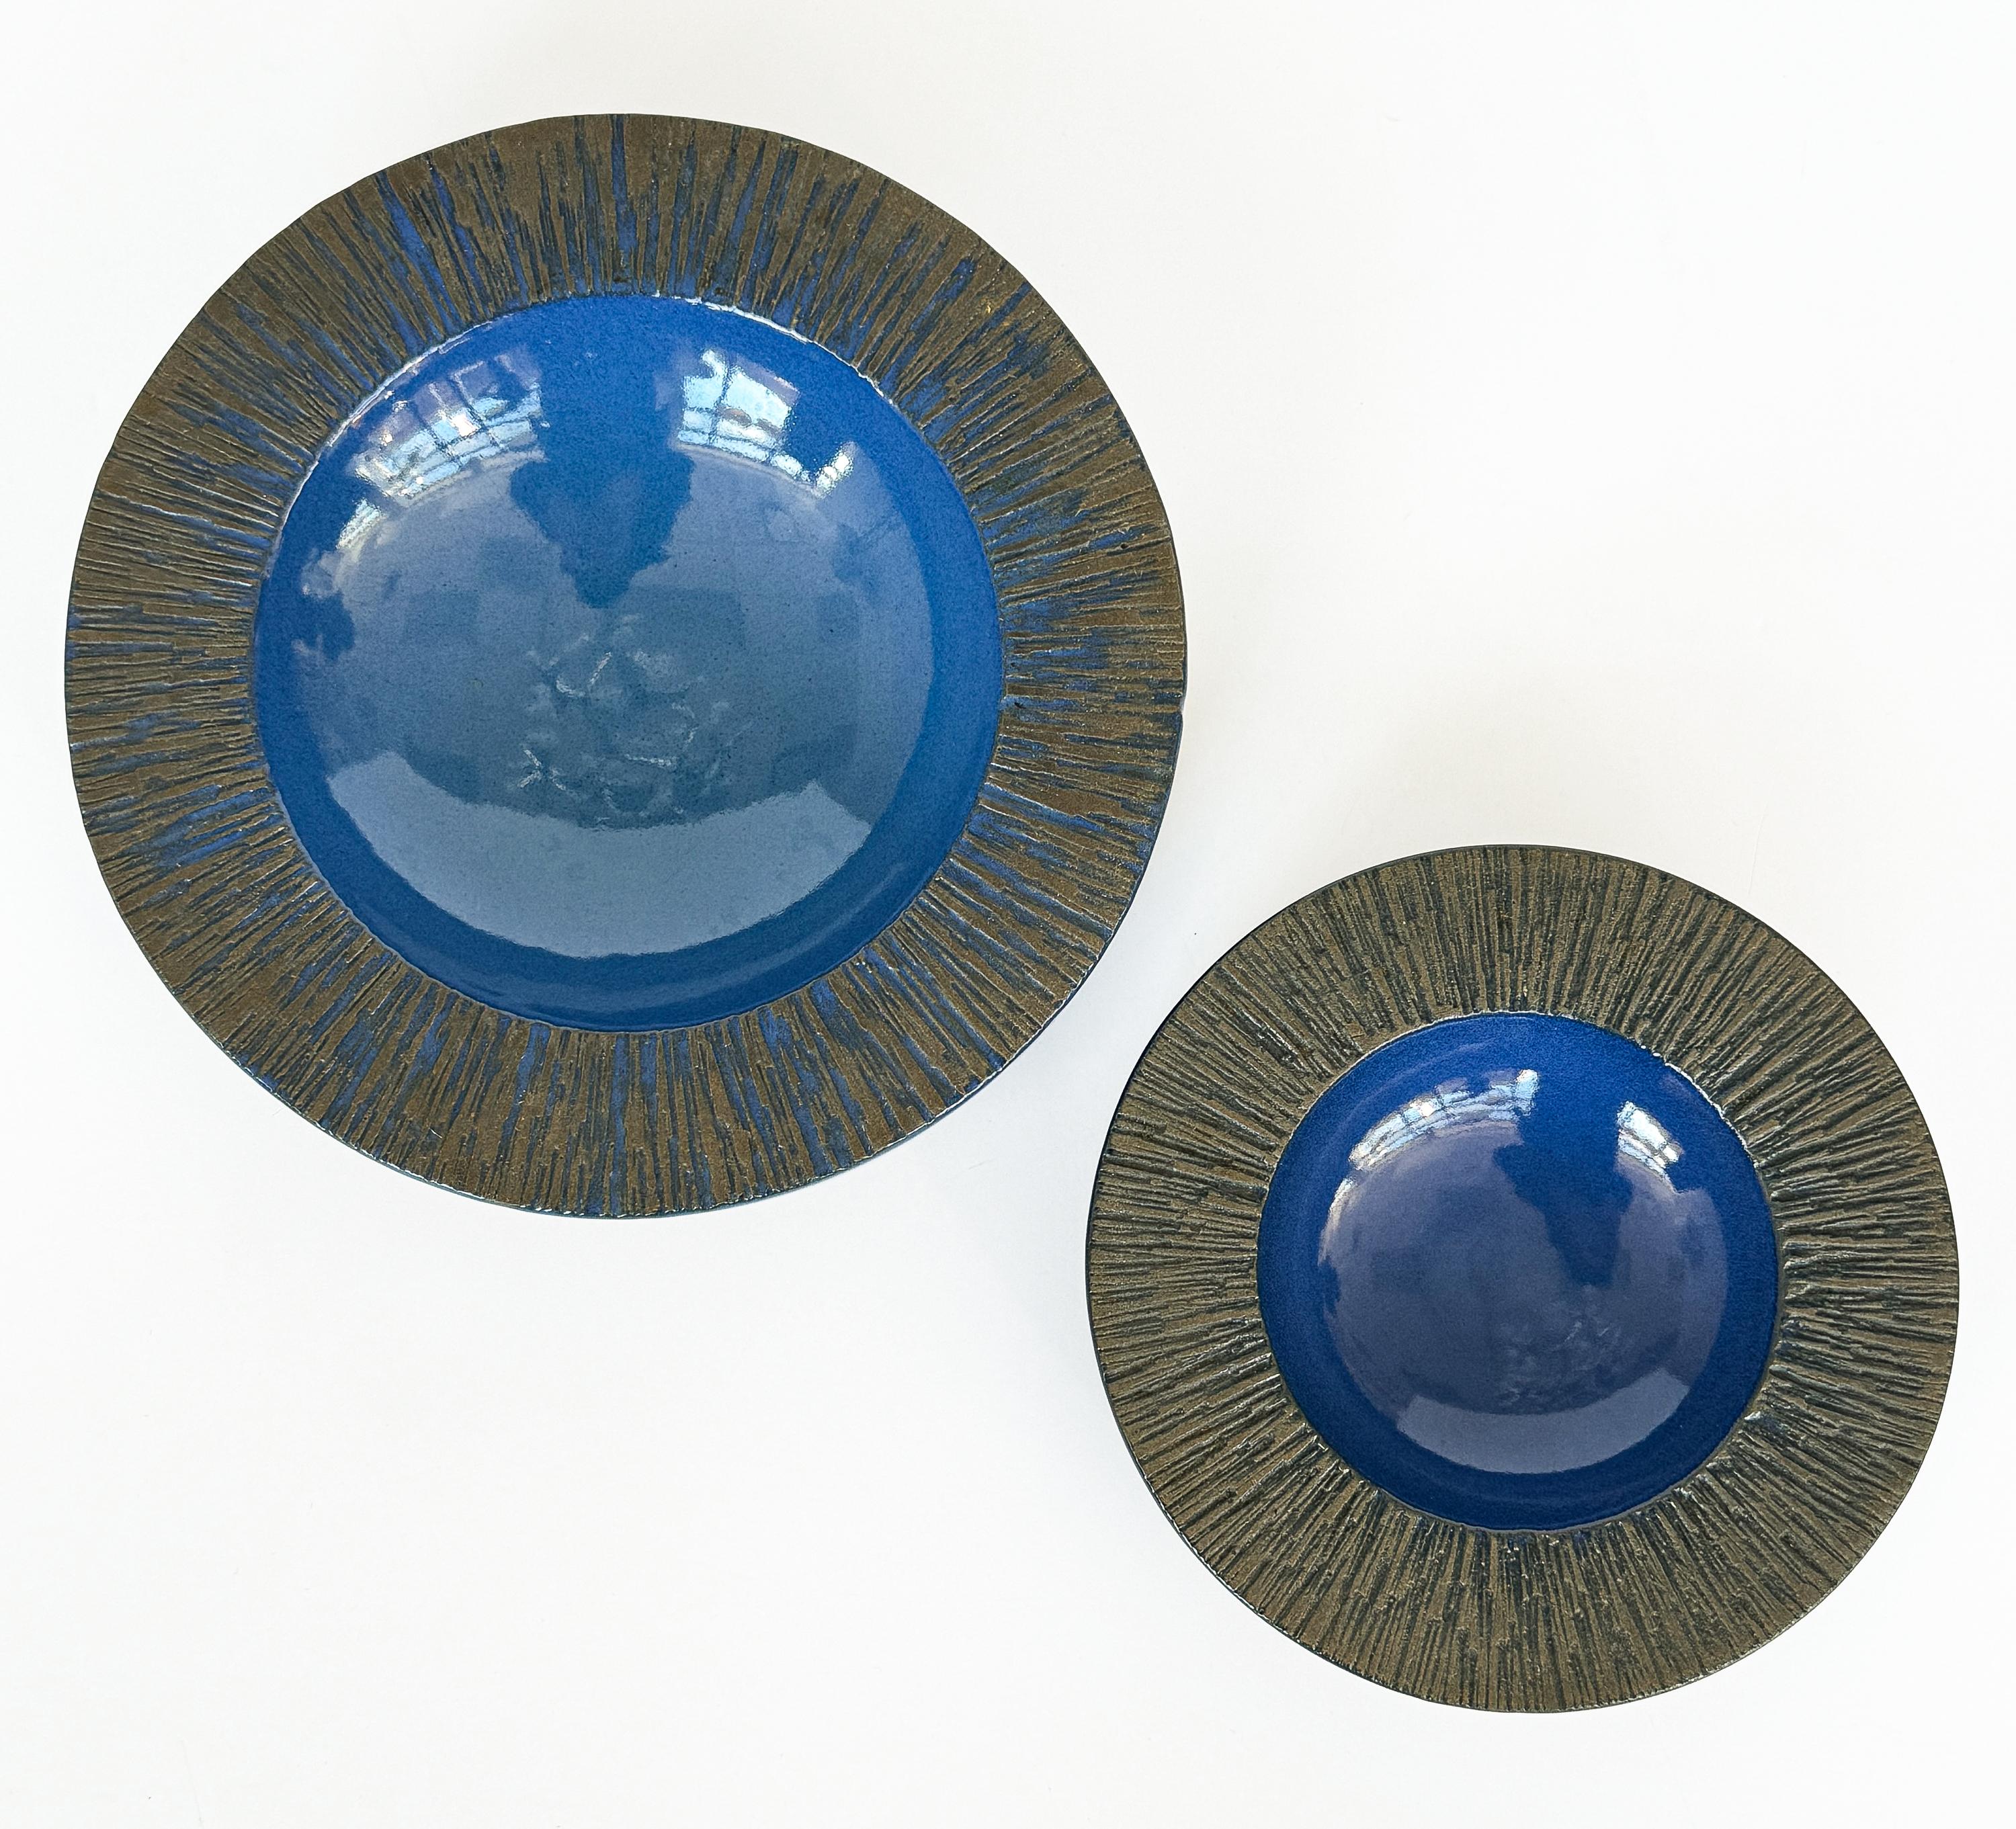 Introducing a captivating set of two Modernist low bowls, designed by Lee Rosen for Design Technics in the spirited 1960s. These vide poche, or catchall bowls, are a sublime blend of function and aesthetic delight, embodying the essence of